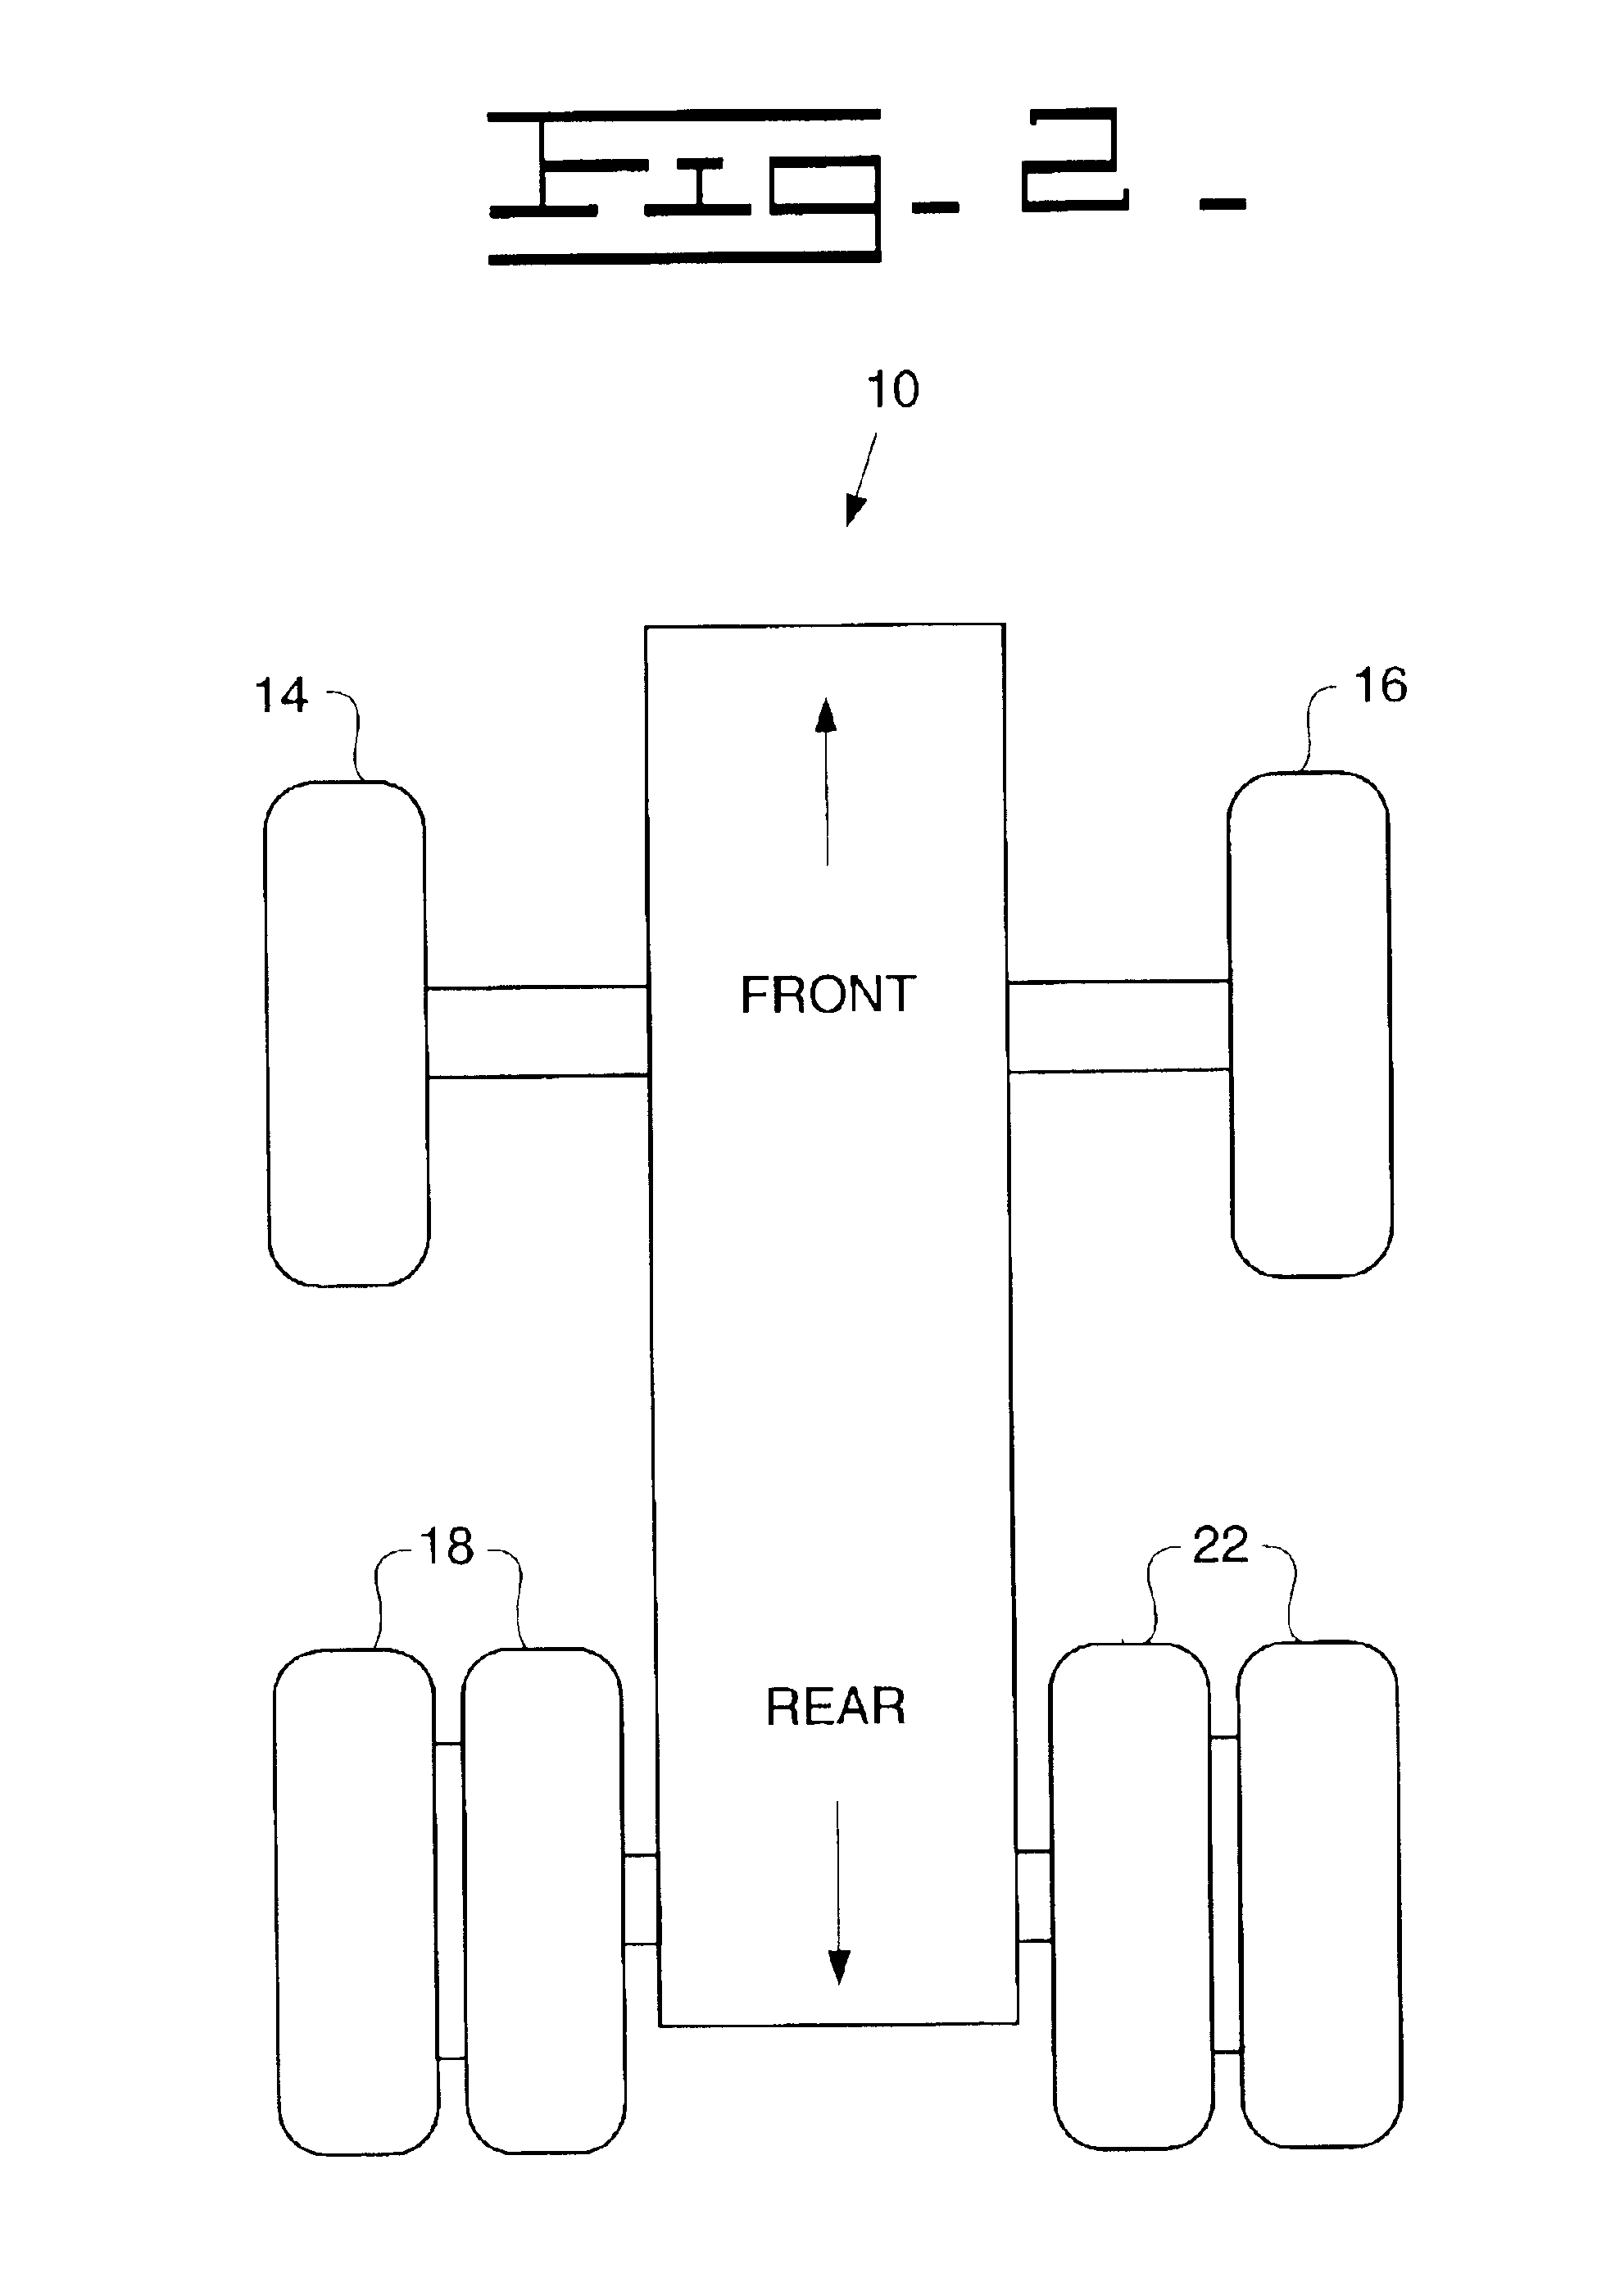 Method and apparatus for controlling ground speed of a work machine based on tire condition